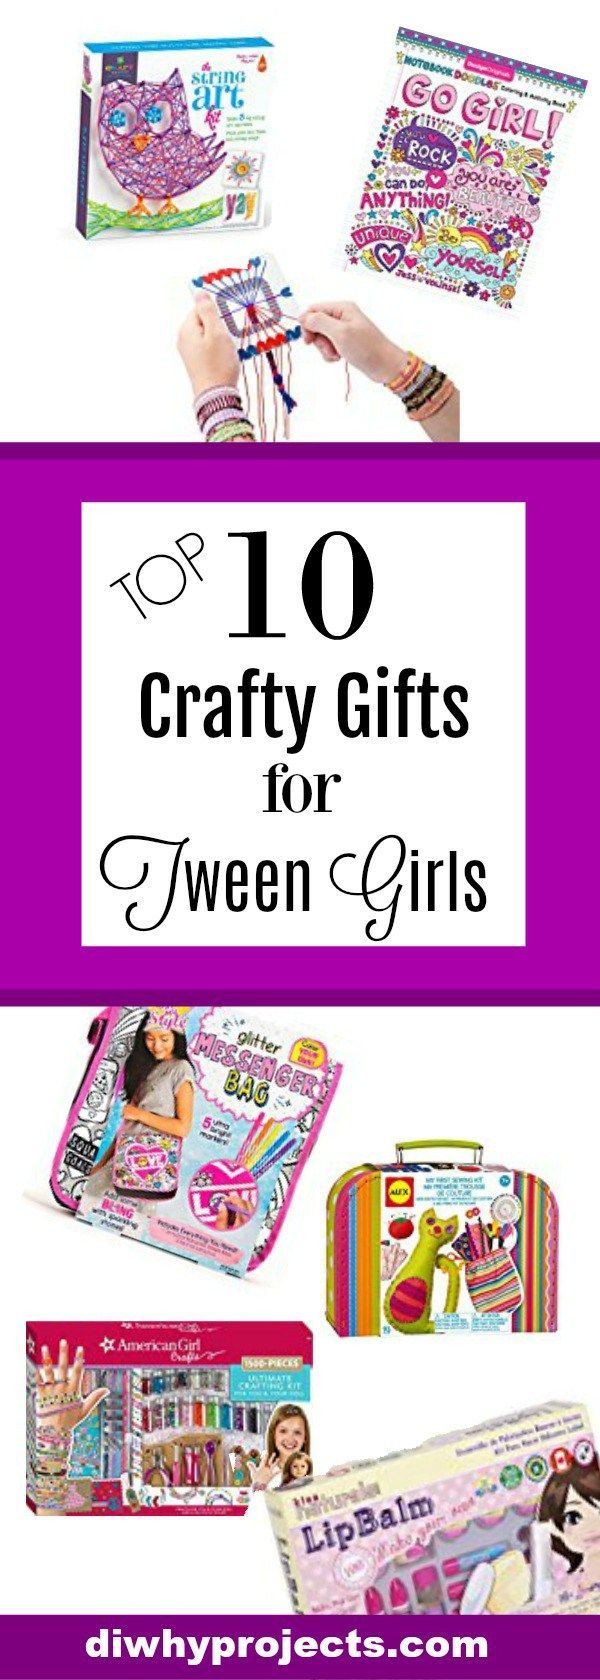 Girls Gift Ideas Age 12
 10 Crafty Gift Ideas for Tween Girls Ages 8 12 2017